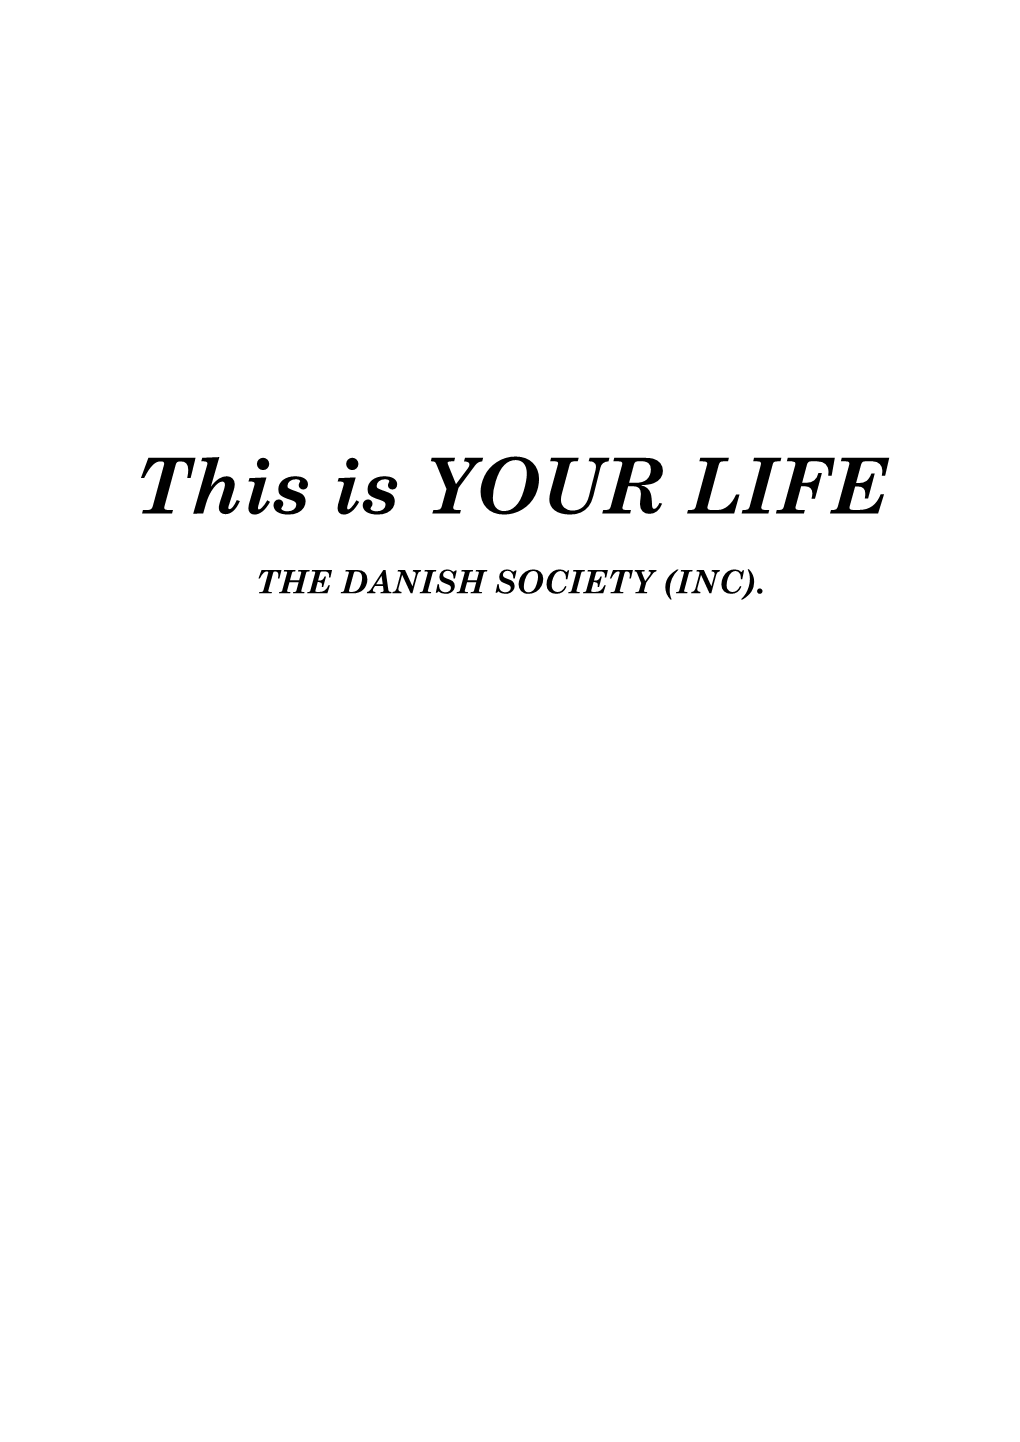 This Is YOUR LIFE